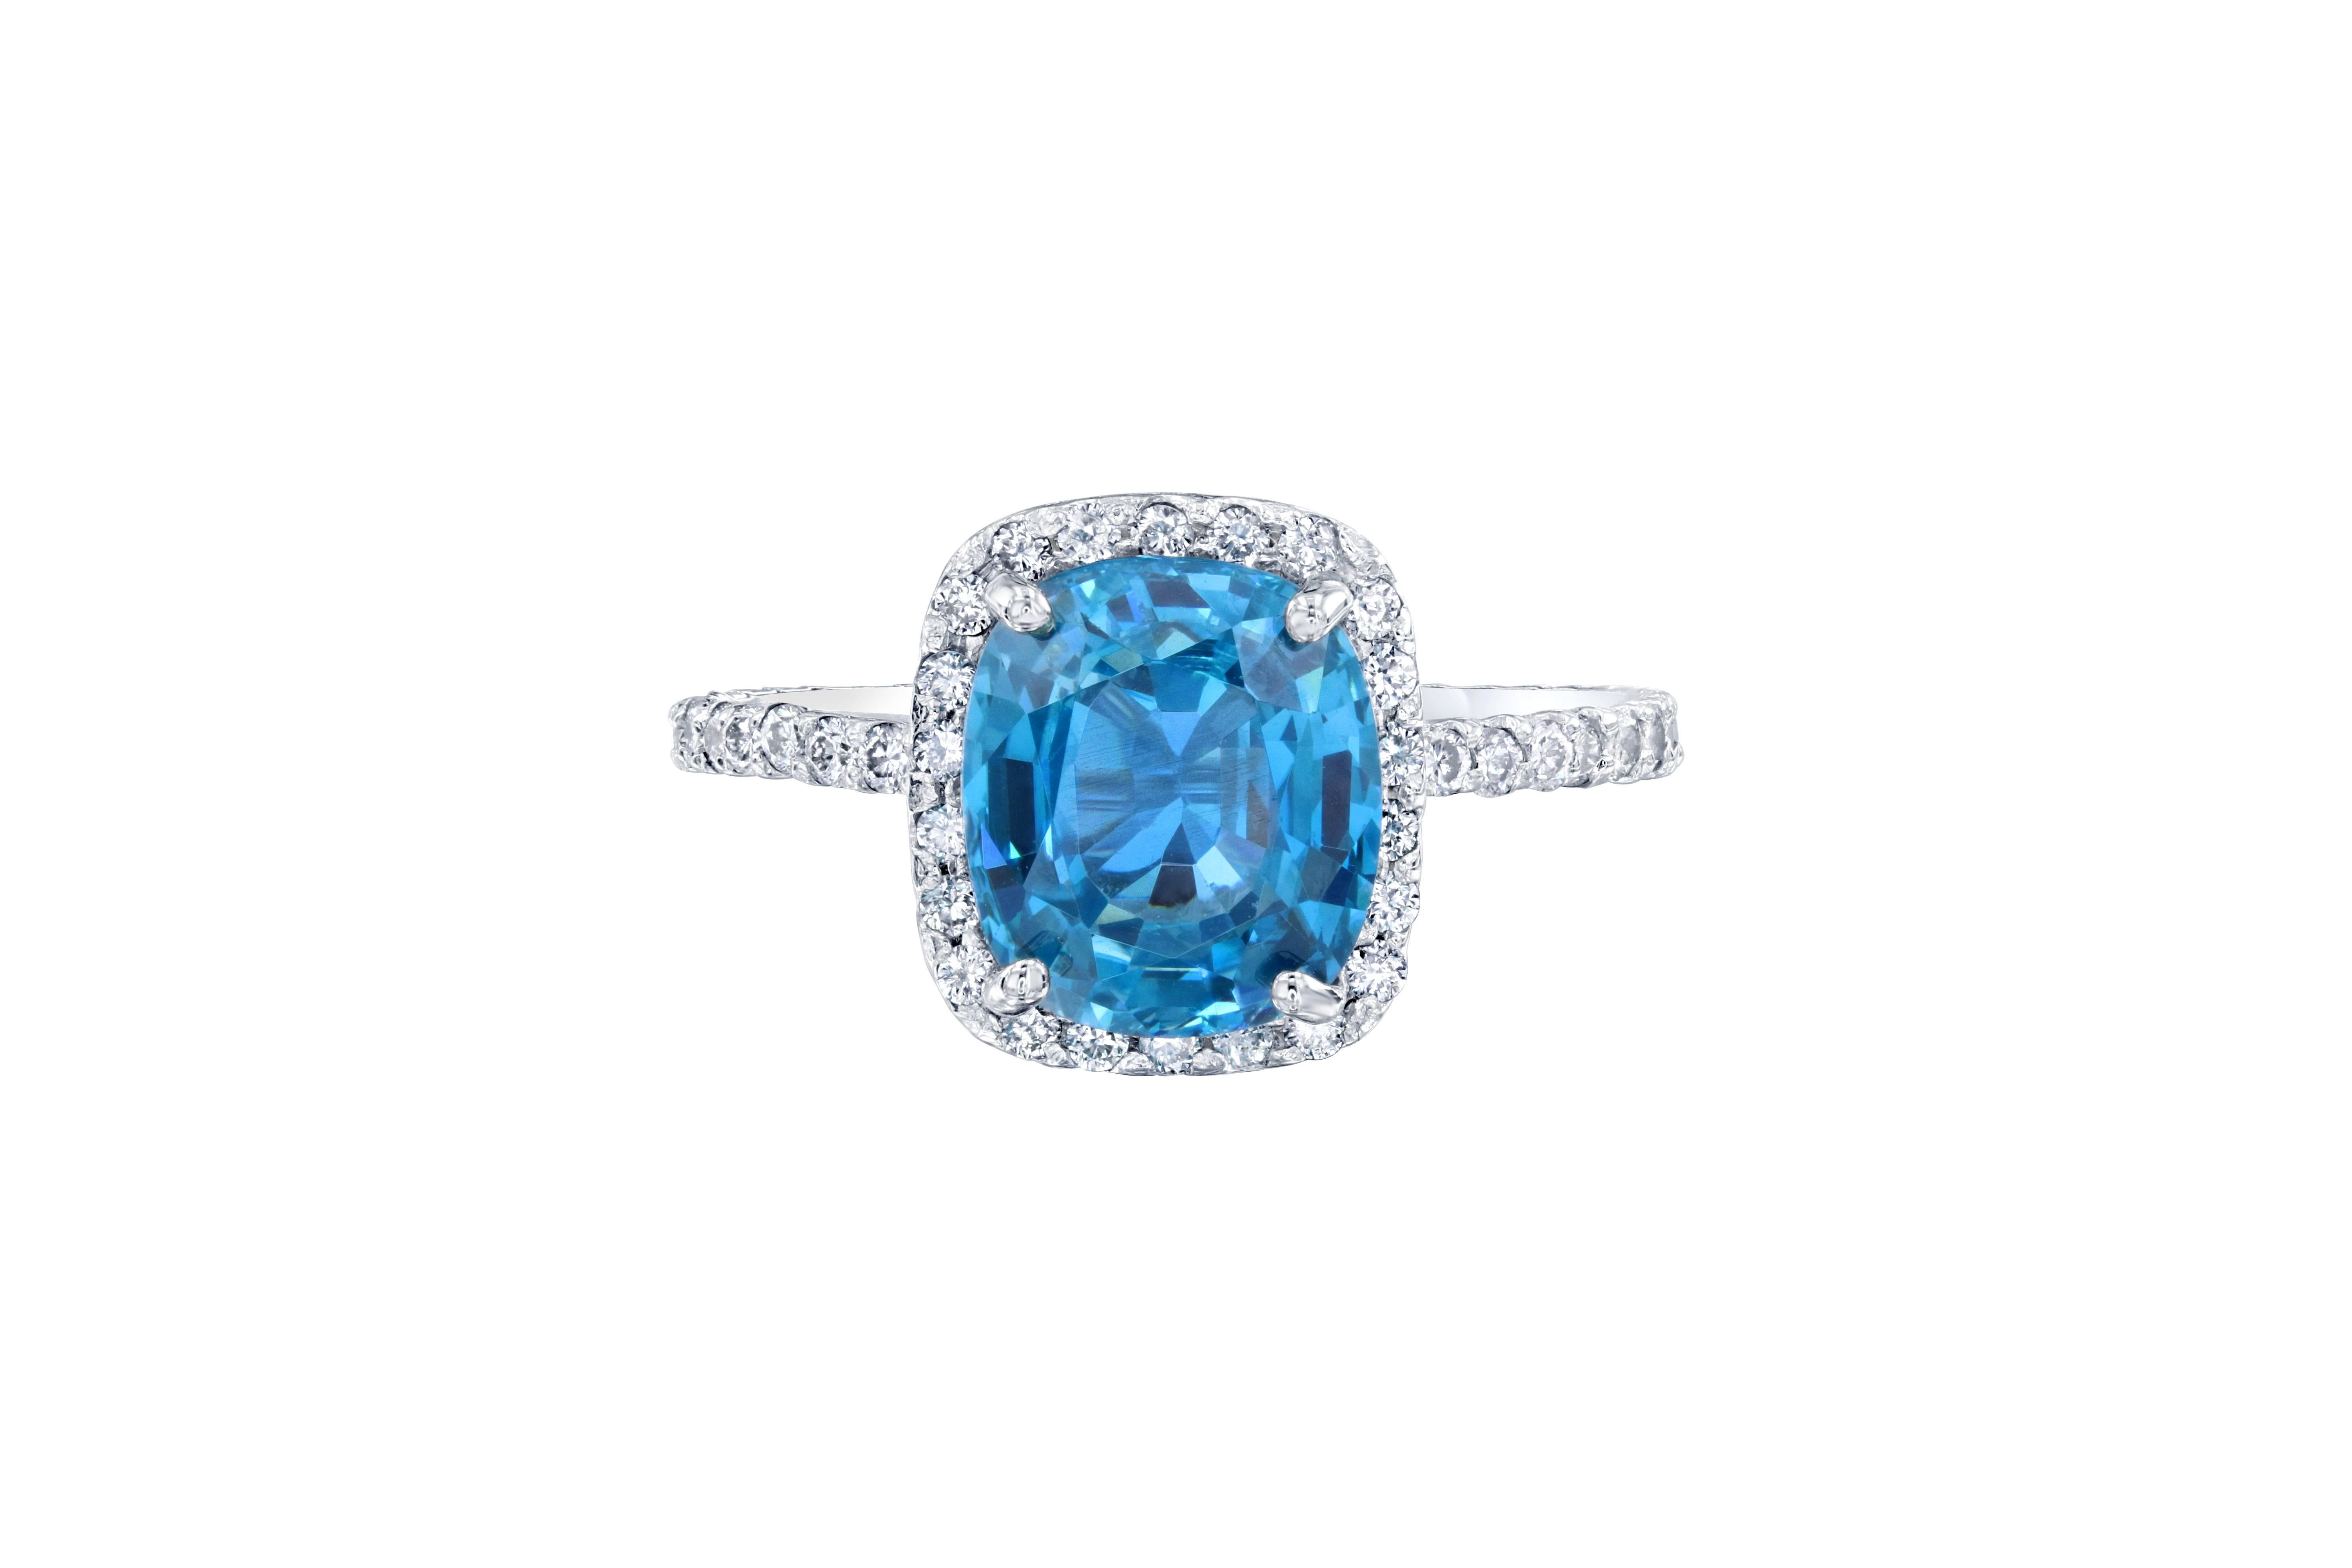 This beautiful halo ring has a 3.73 carat Blue Zircon set in the center of the ring. A Blue Zircon is a natural stone that is mined in Vietnam. The ring has a halo of 54 Round Brilliant Cut Diamonds that weigh 0.54 carats. (Clarity: VS - Color: I). 